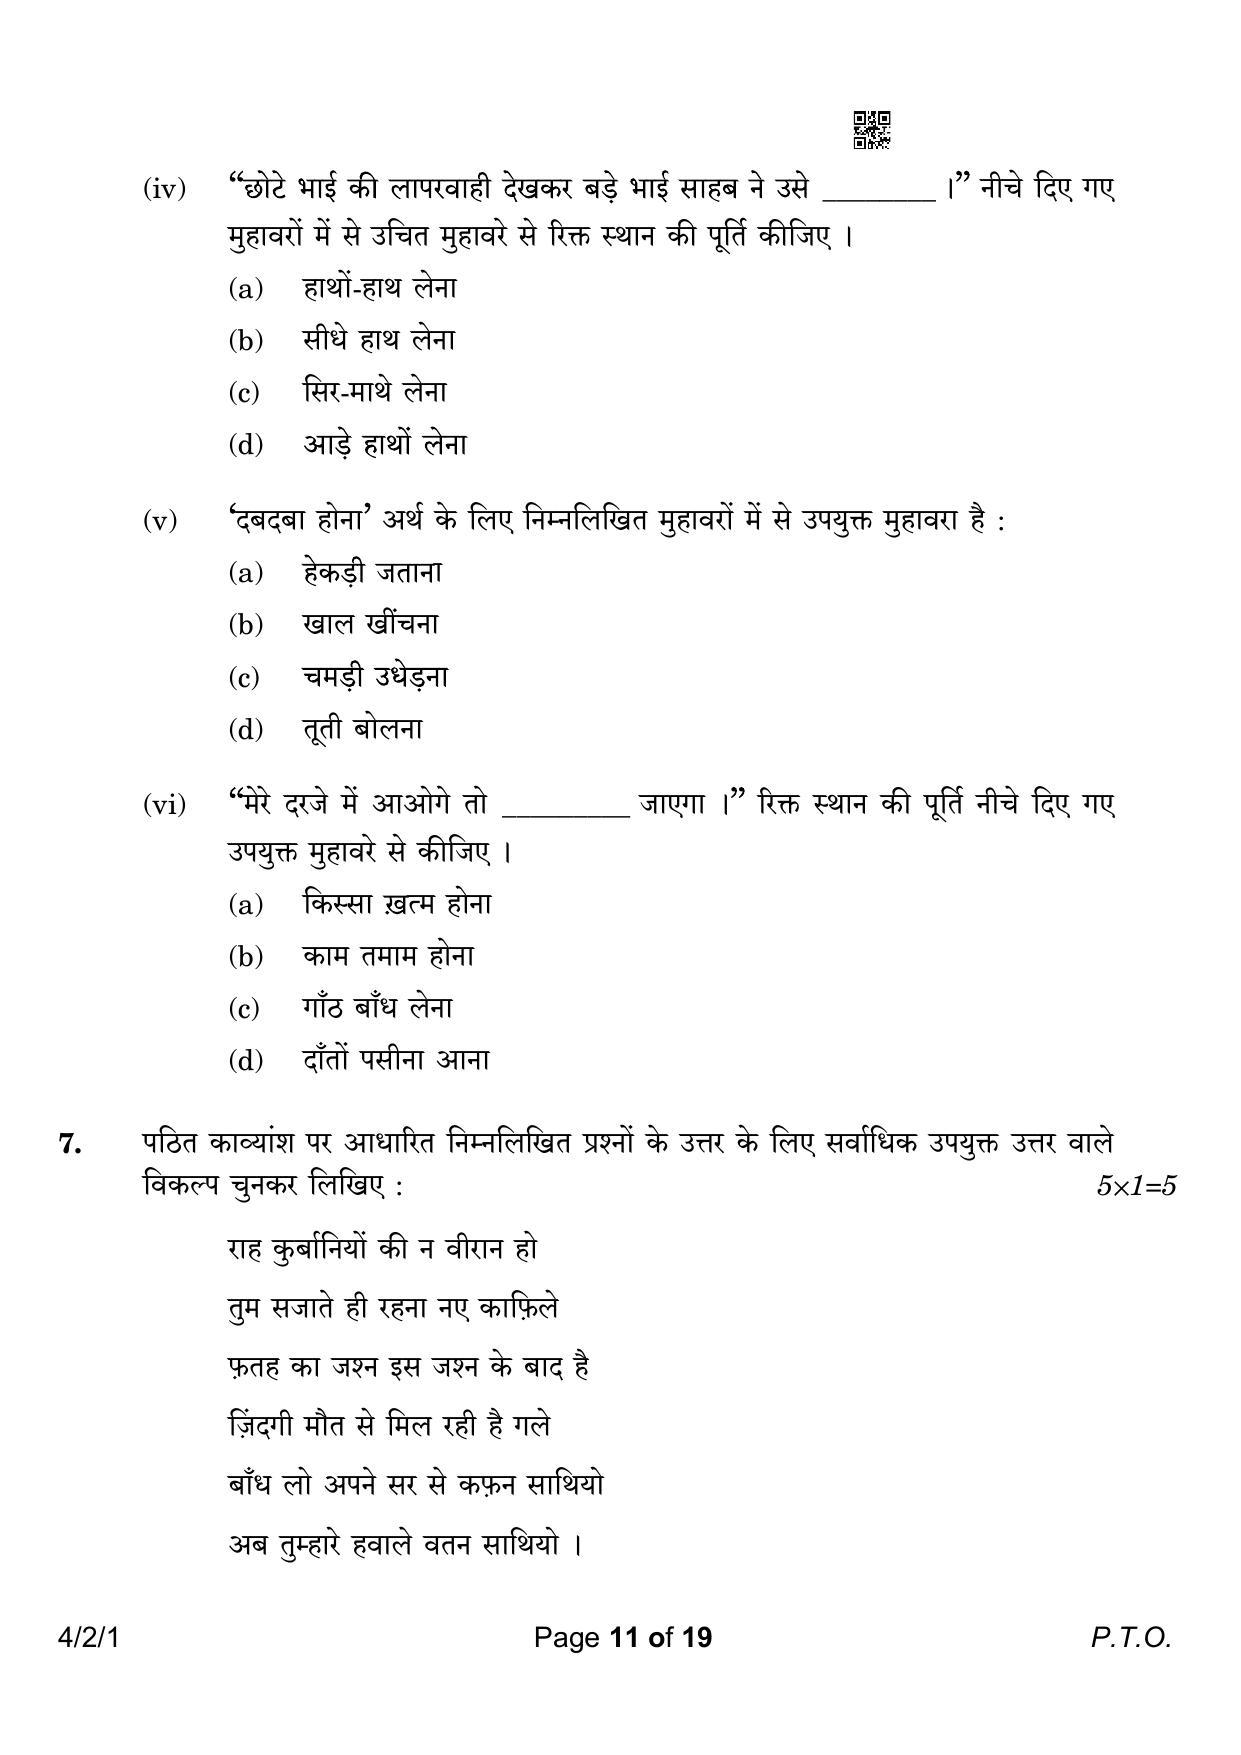 CBSE Class 10 4-2-1 Hindi B 2023 Question Paper - Page 11